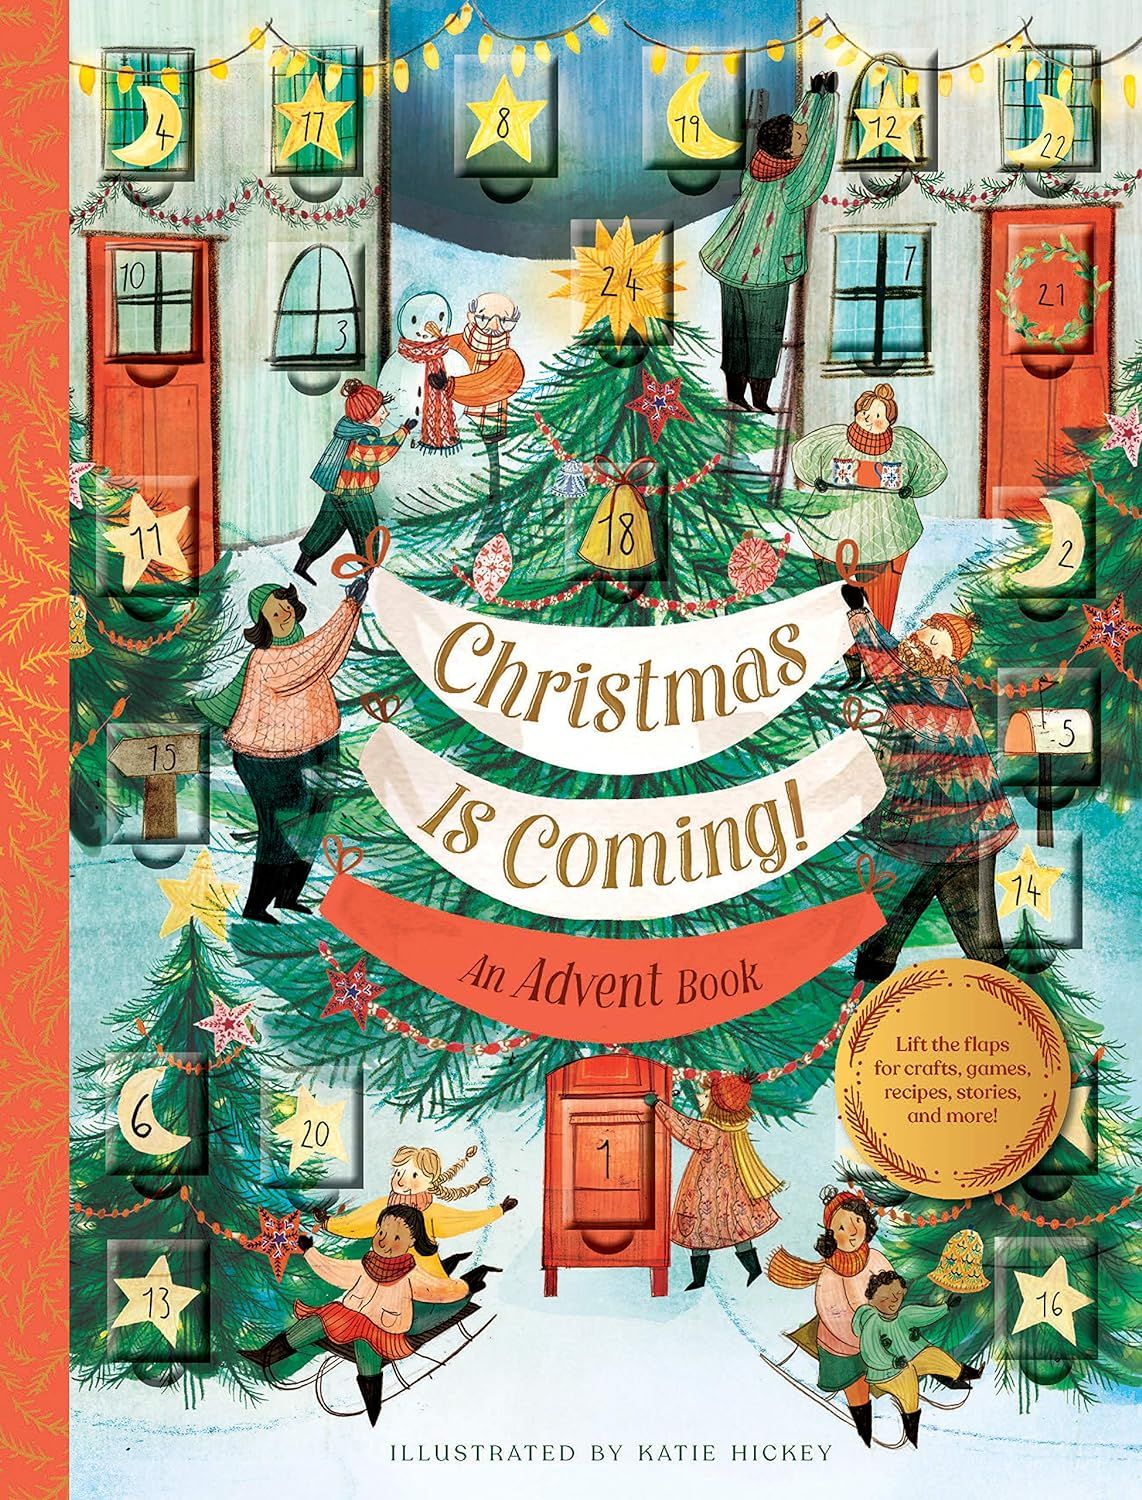 Christmas Is Coming! An Advent Book: Crafts, games, recipes, stories, and more! (Christmas Calendar, | Amazon (US)